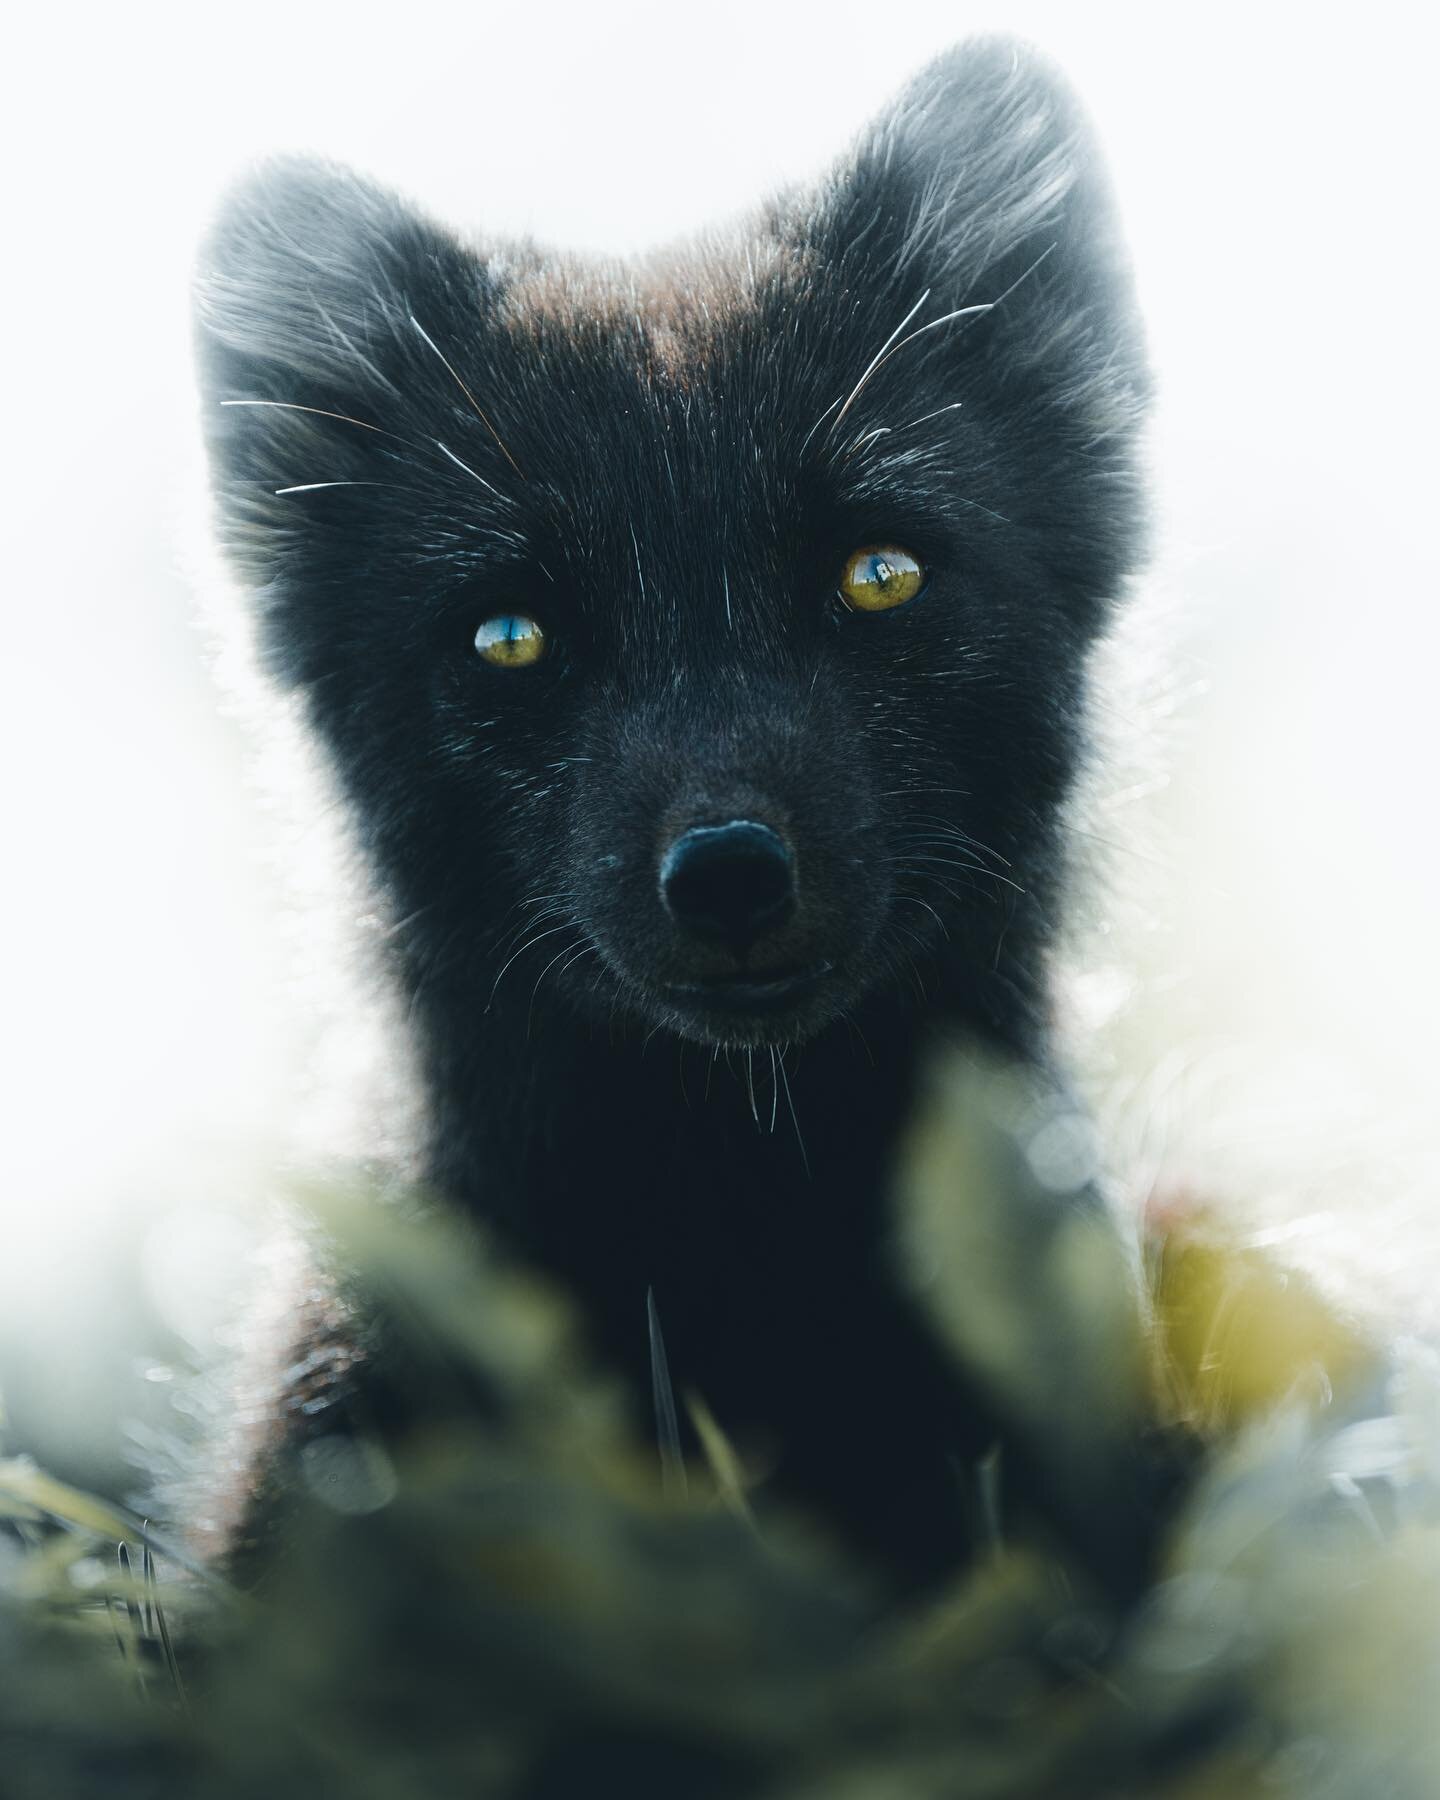 Insolent Spirit.

#animal_captures #bpa_nature
#dreamland_arts_of_nature #fiftyshades_of_nature
#folkmagazine #folkscenery #forest #fox #foxlovers
#gottalove_a_#ig_magical_nature
#igworldclub_nature #lensloves_nature #nature
#arcticfox #natures_moods